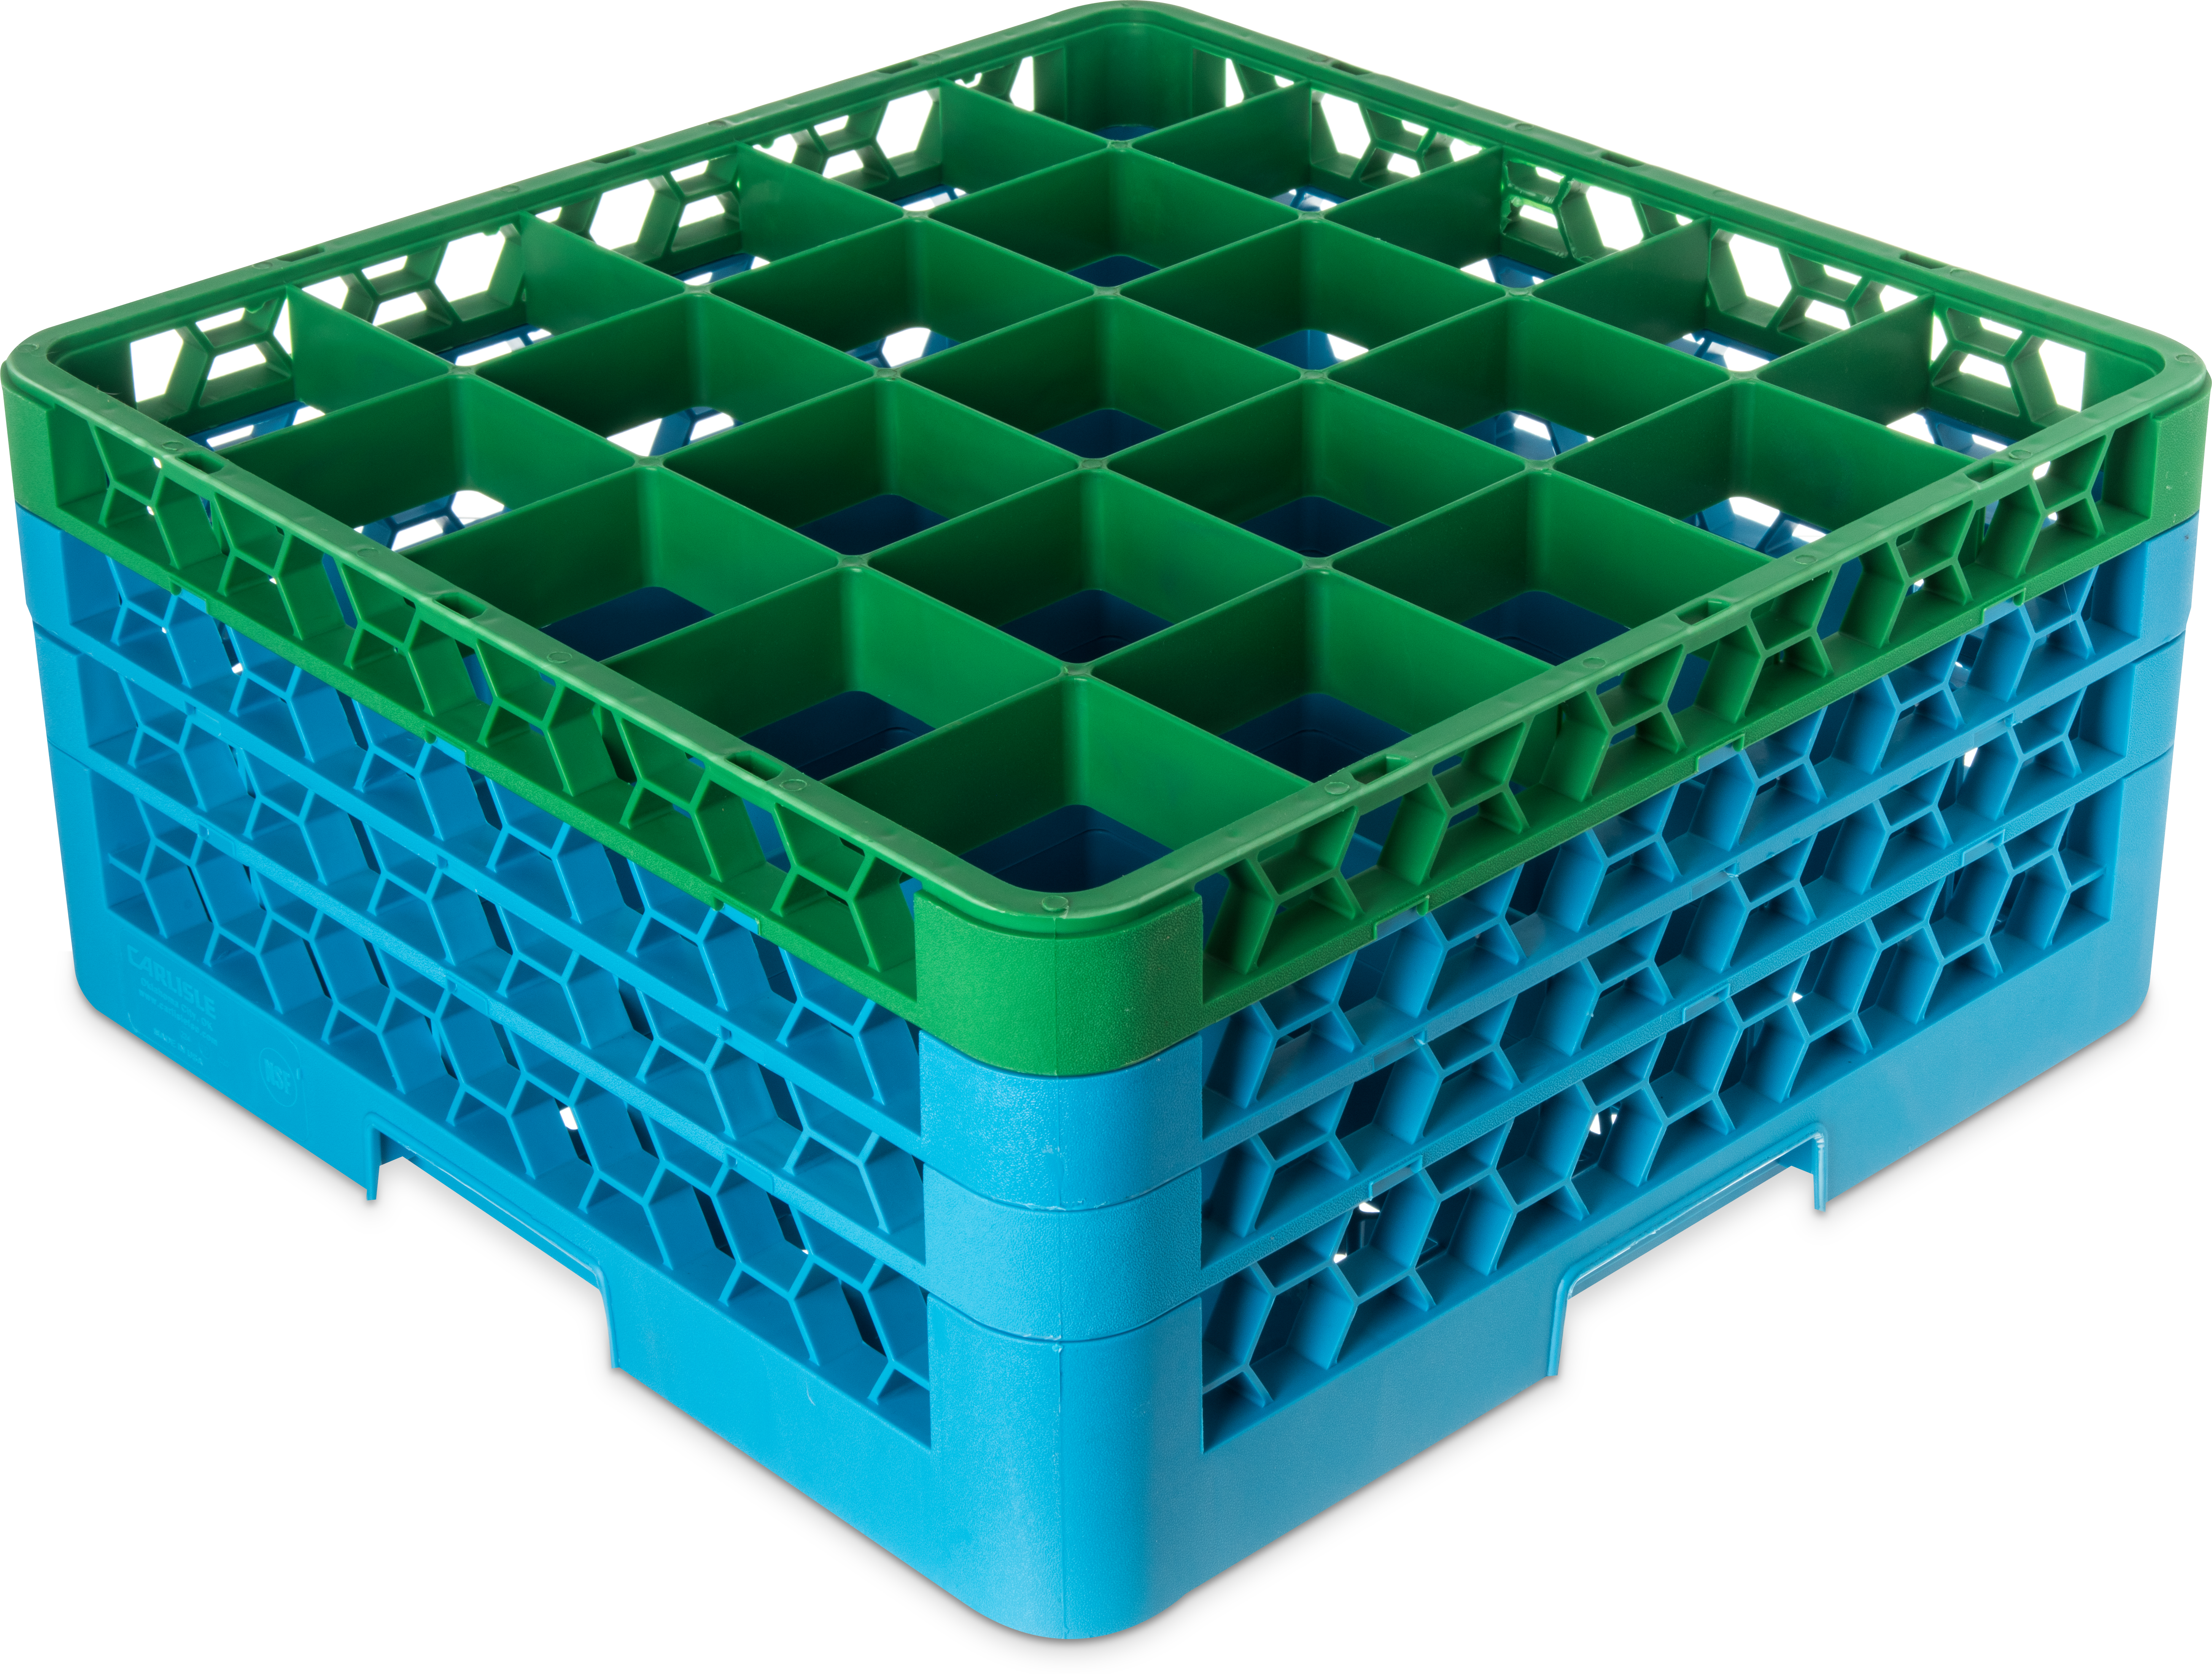 OptiClean 25 Compartment Glass Rack with 3 Extenders 8.72 - Green-Carlisle Blue